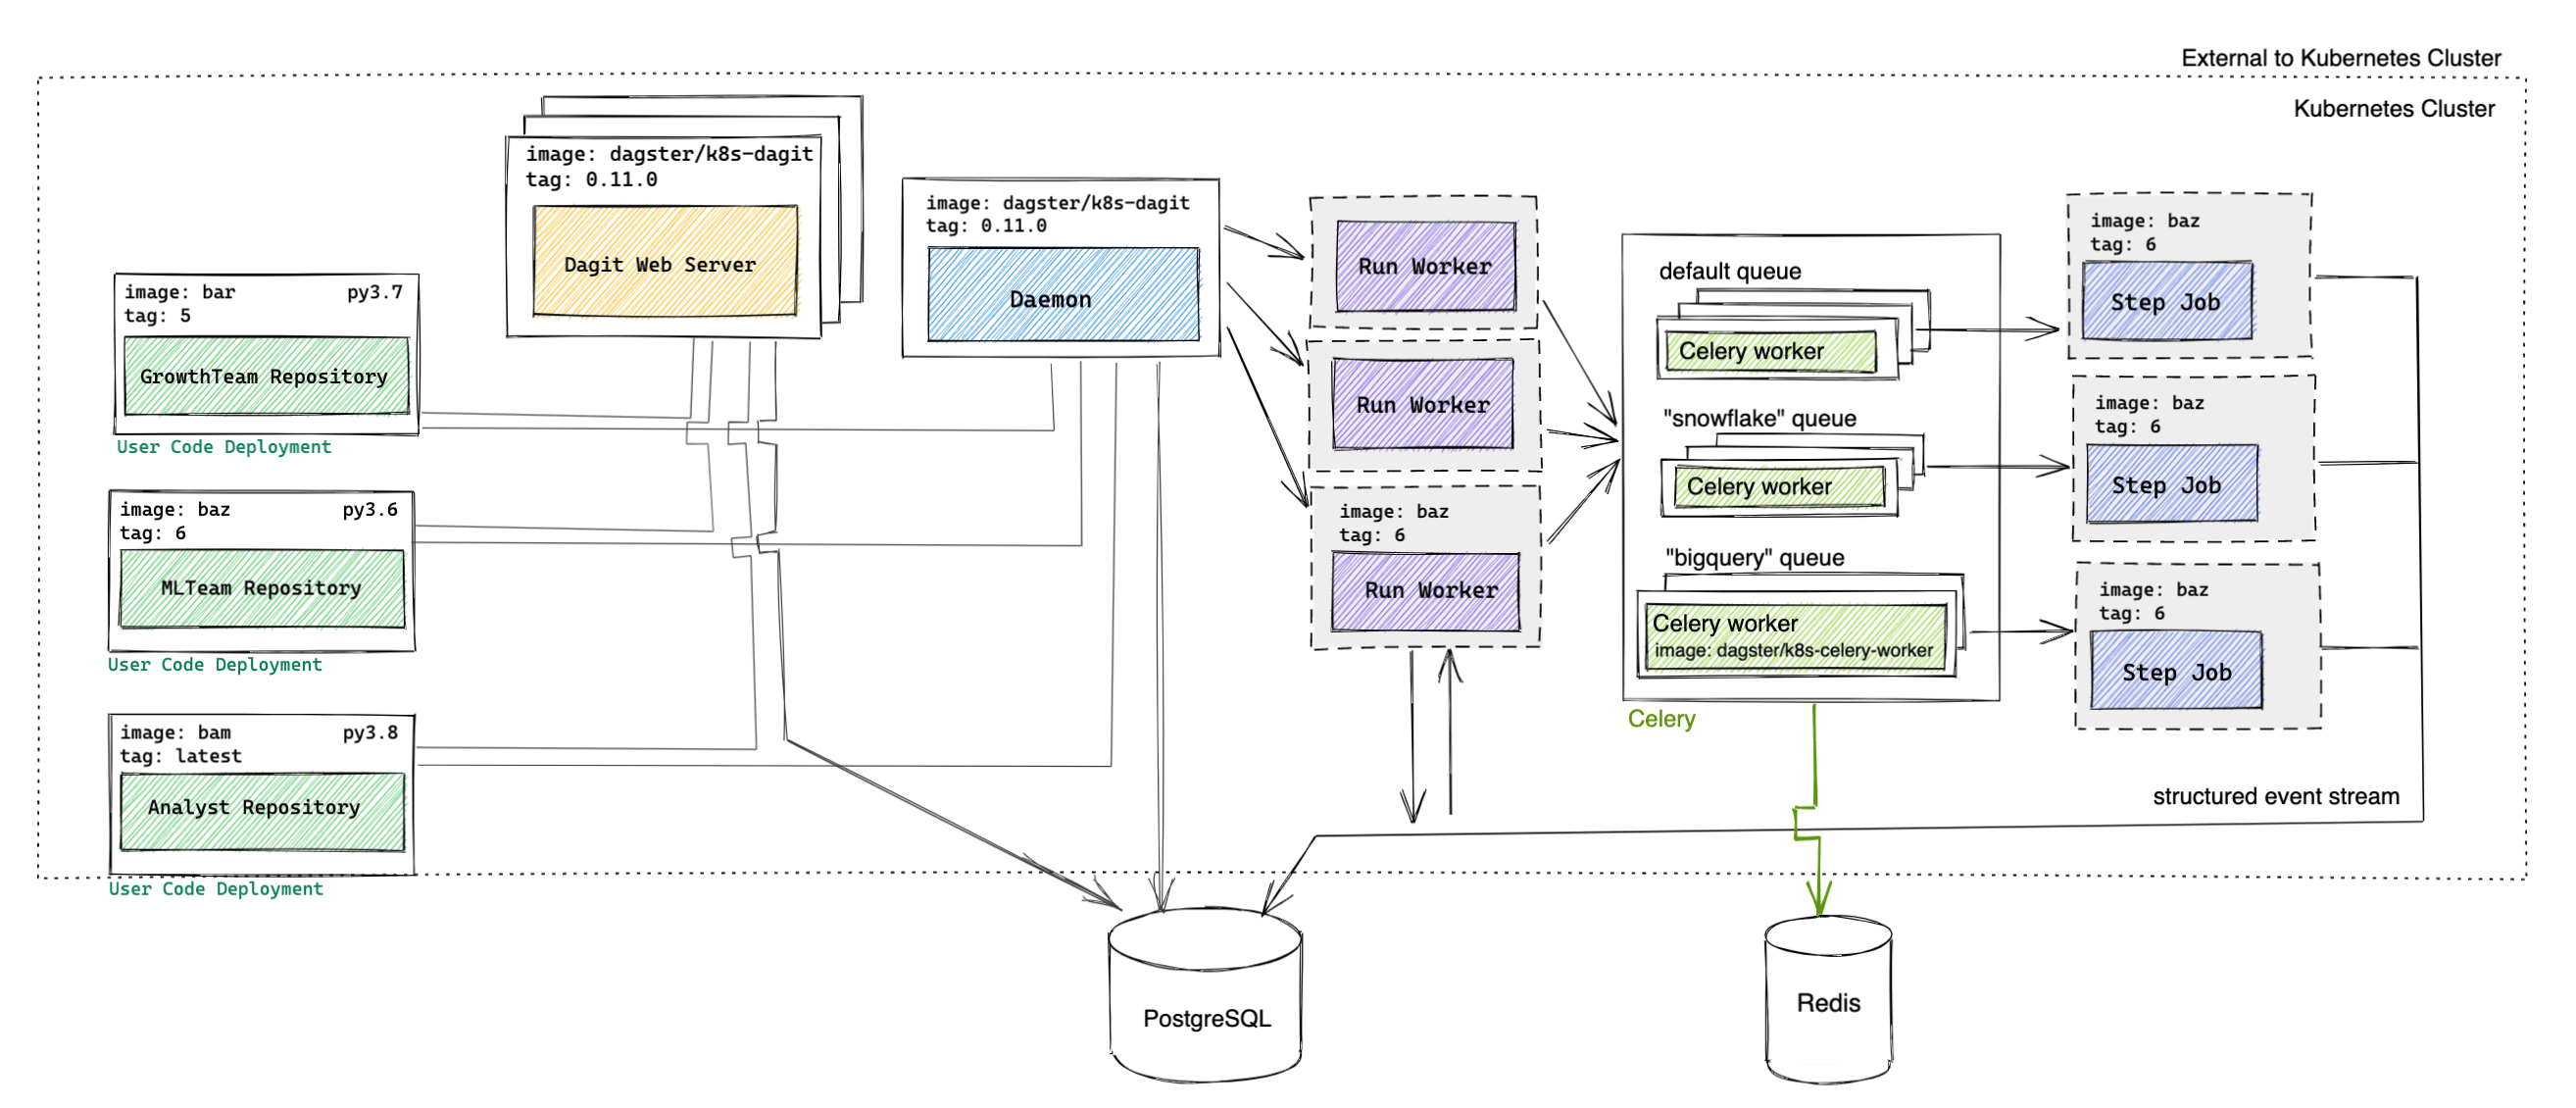 dagster-kubernetes-advanced-architecture.png